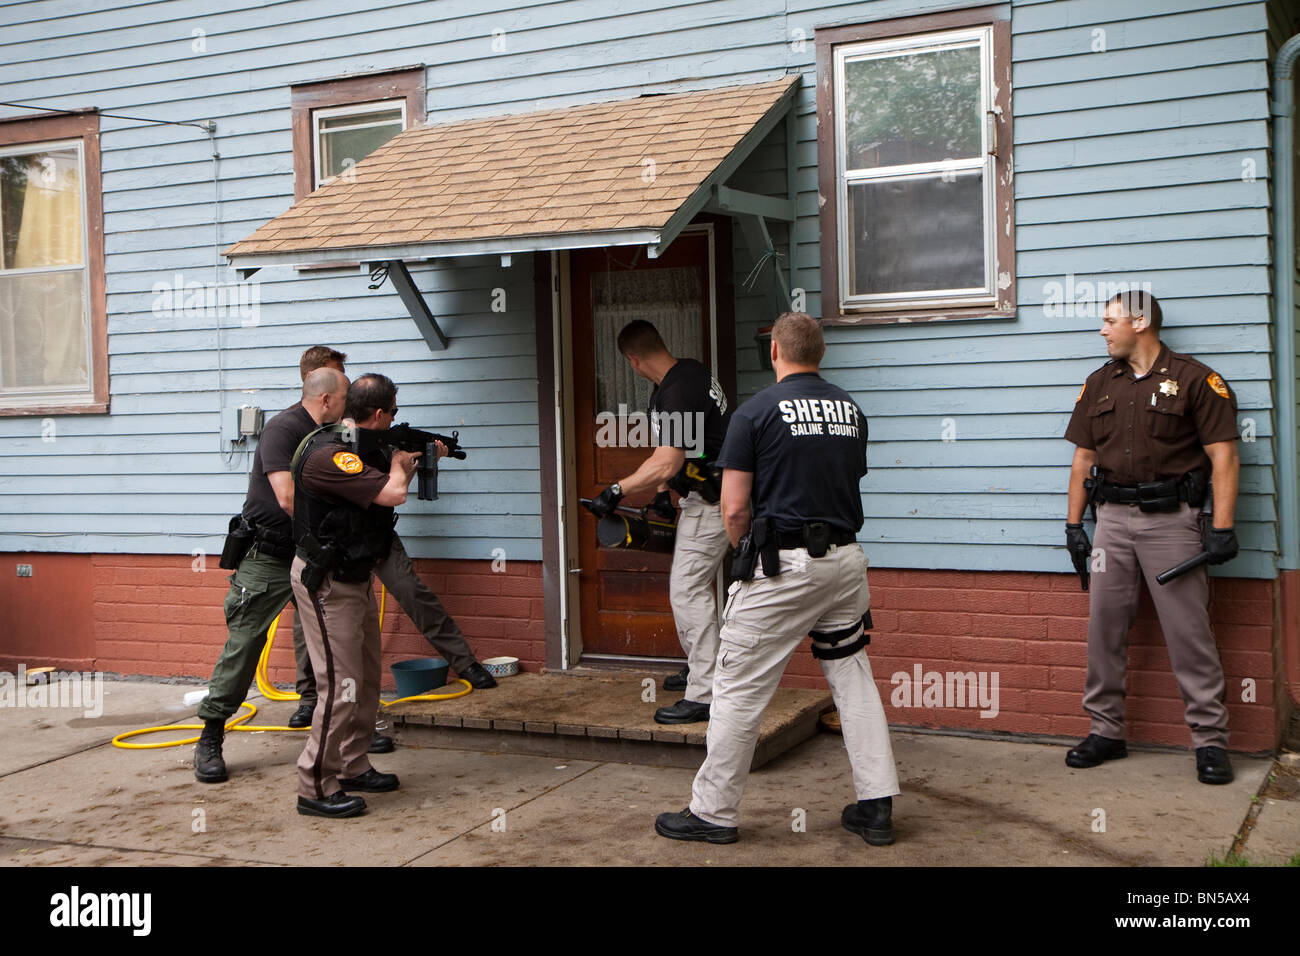 Deputy sheriff's serving drug related search warrant in a rural US community. Narcotics were located inside the residence. Stock Photo